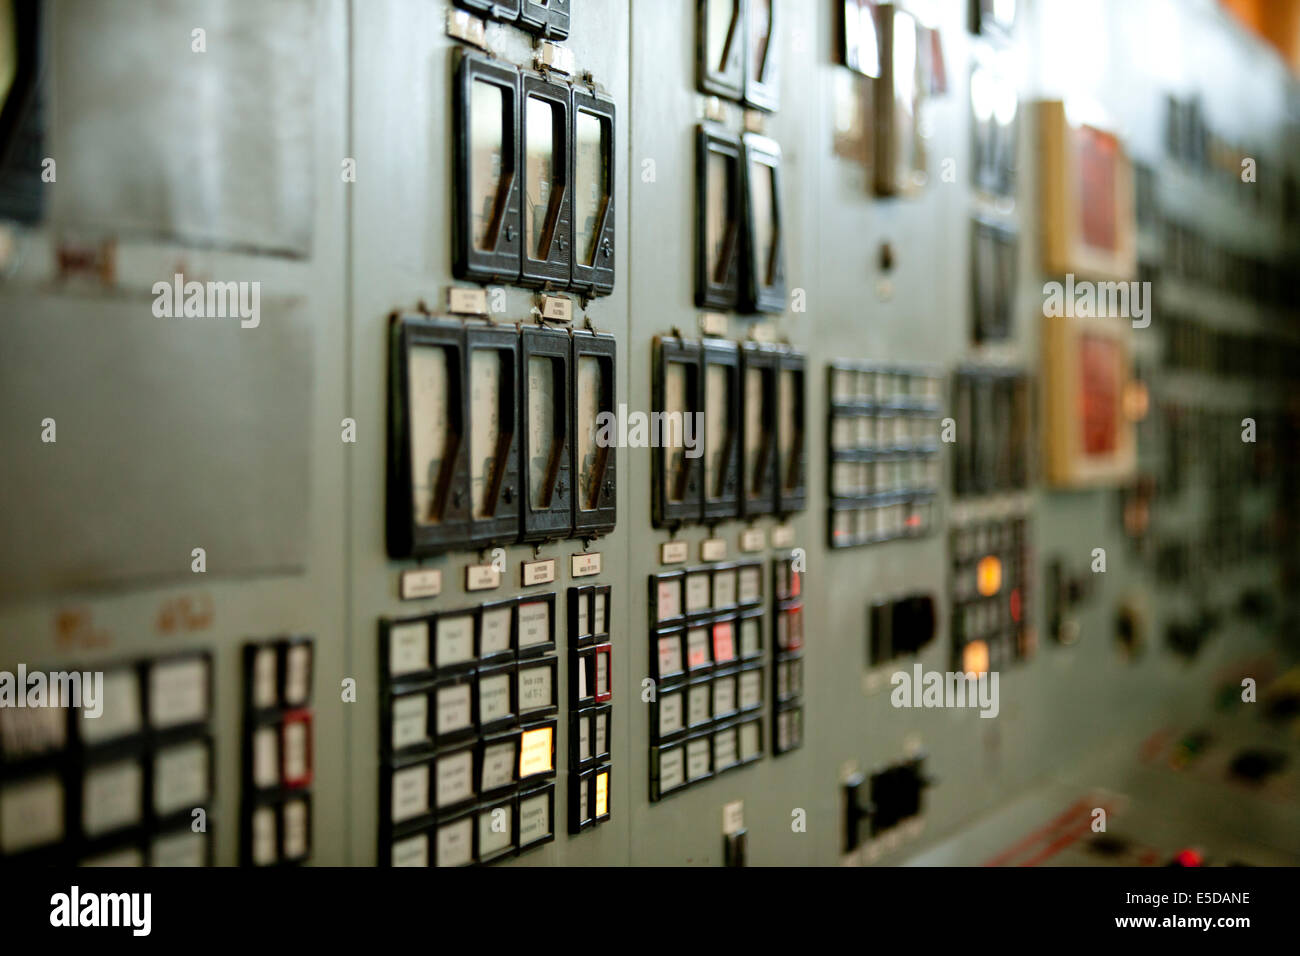 Russian old electrics power station circuits dials Stock Photo